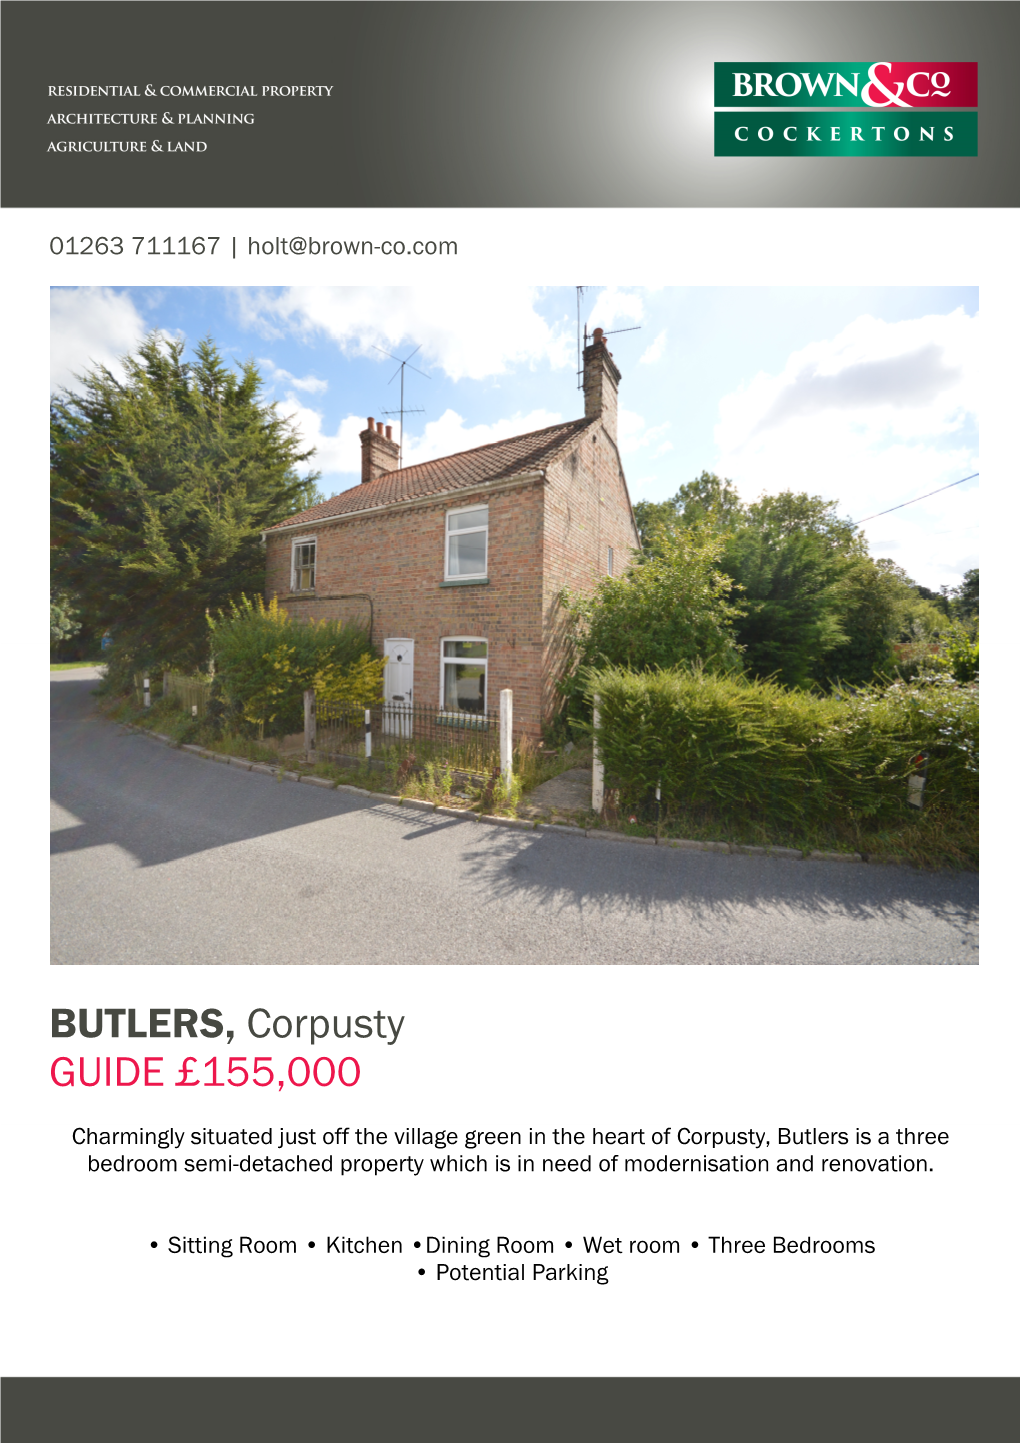 BUTLERS, Corpusty GUIDE £155,000